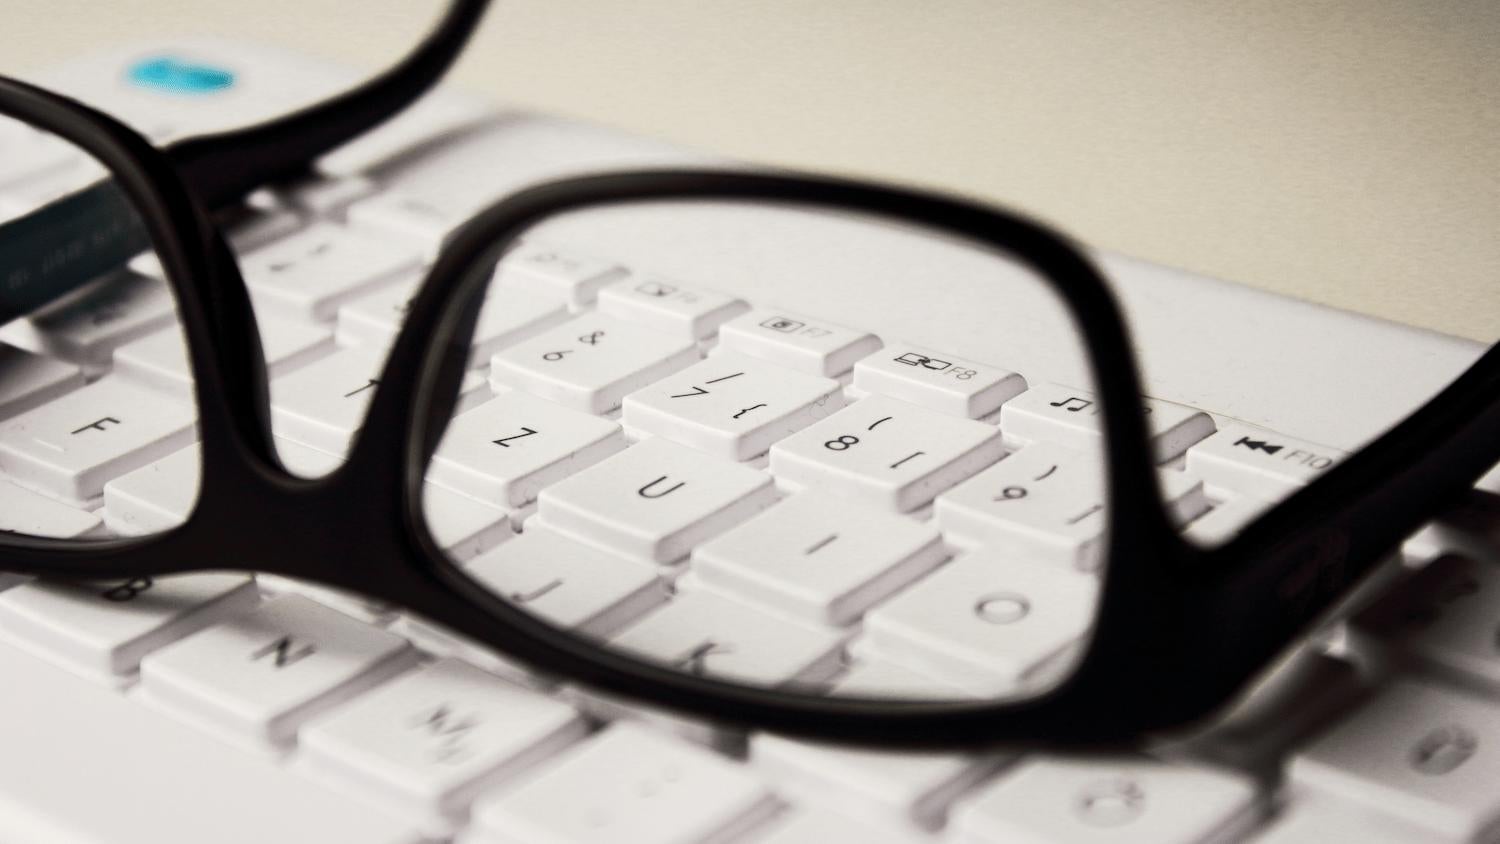 Glasses on a computer keyboard